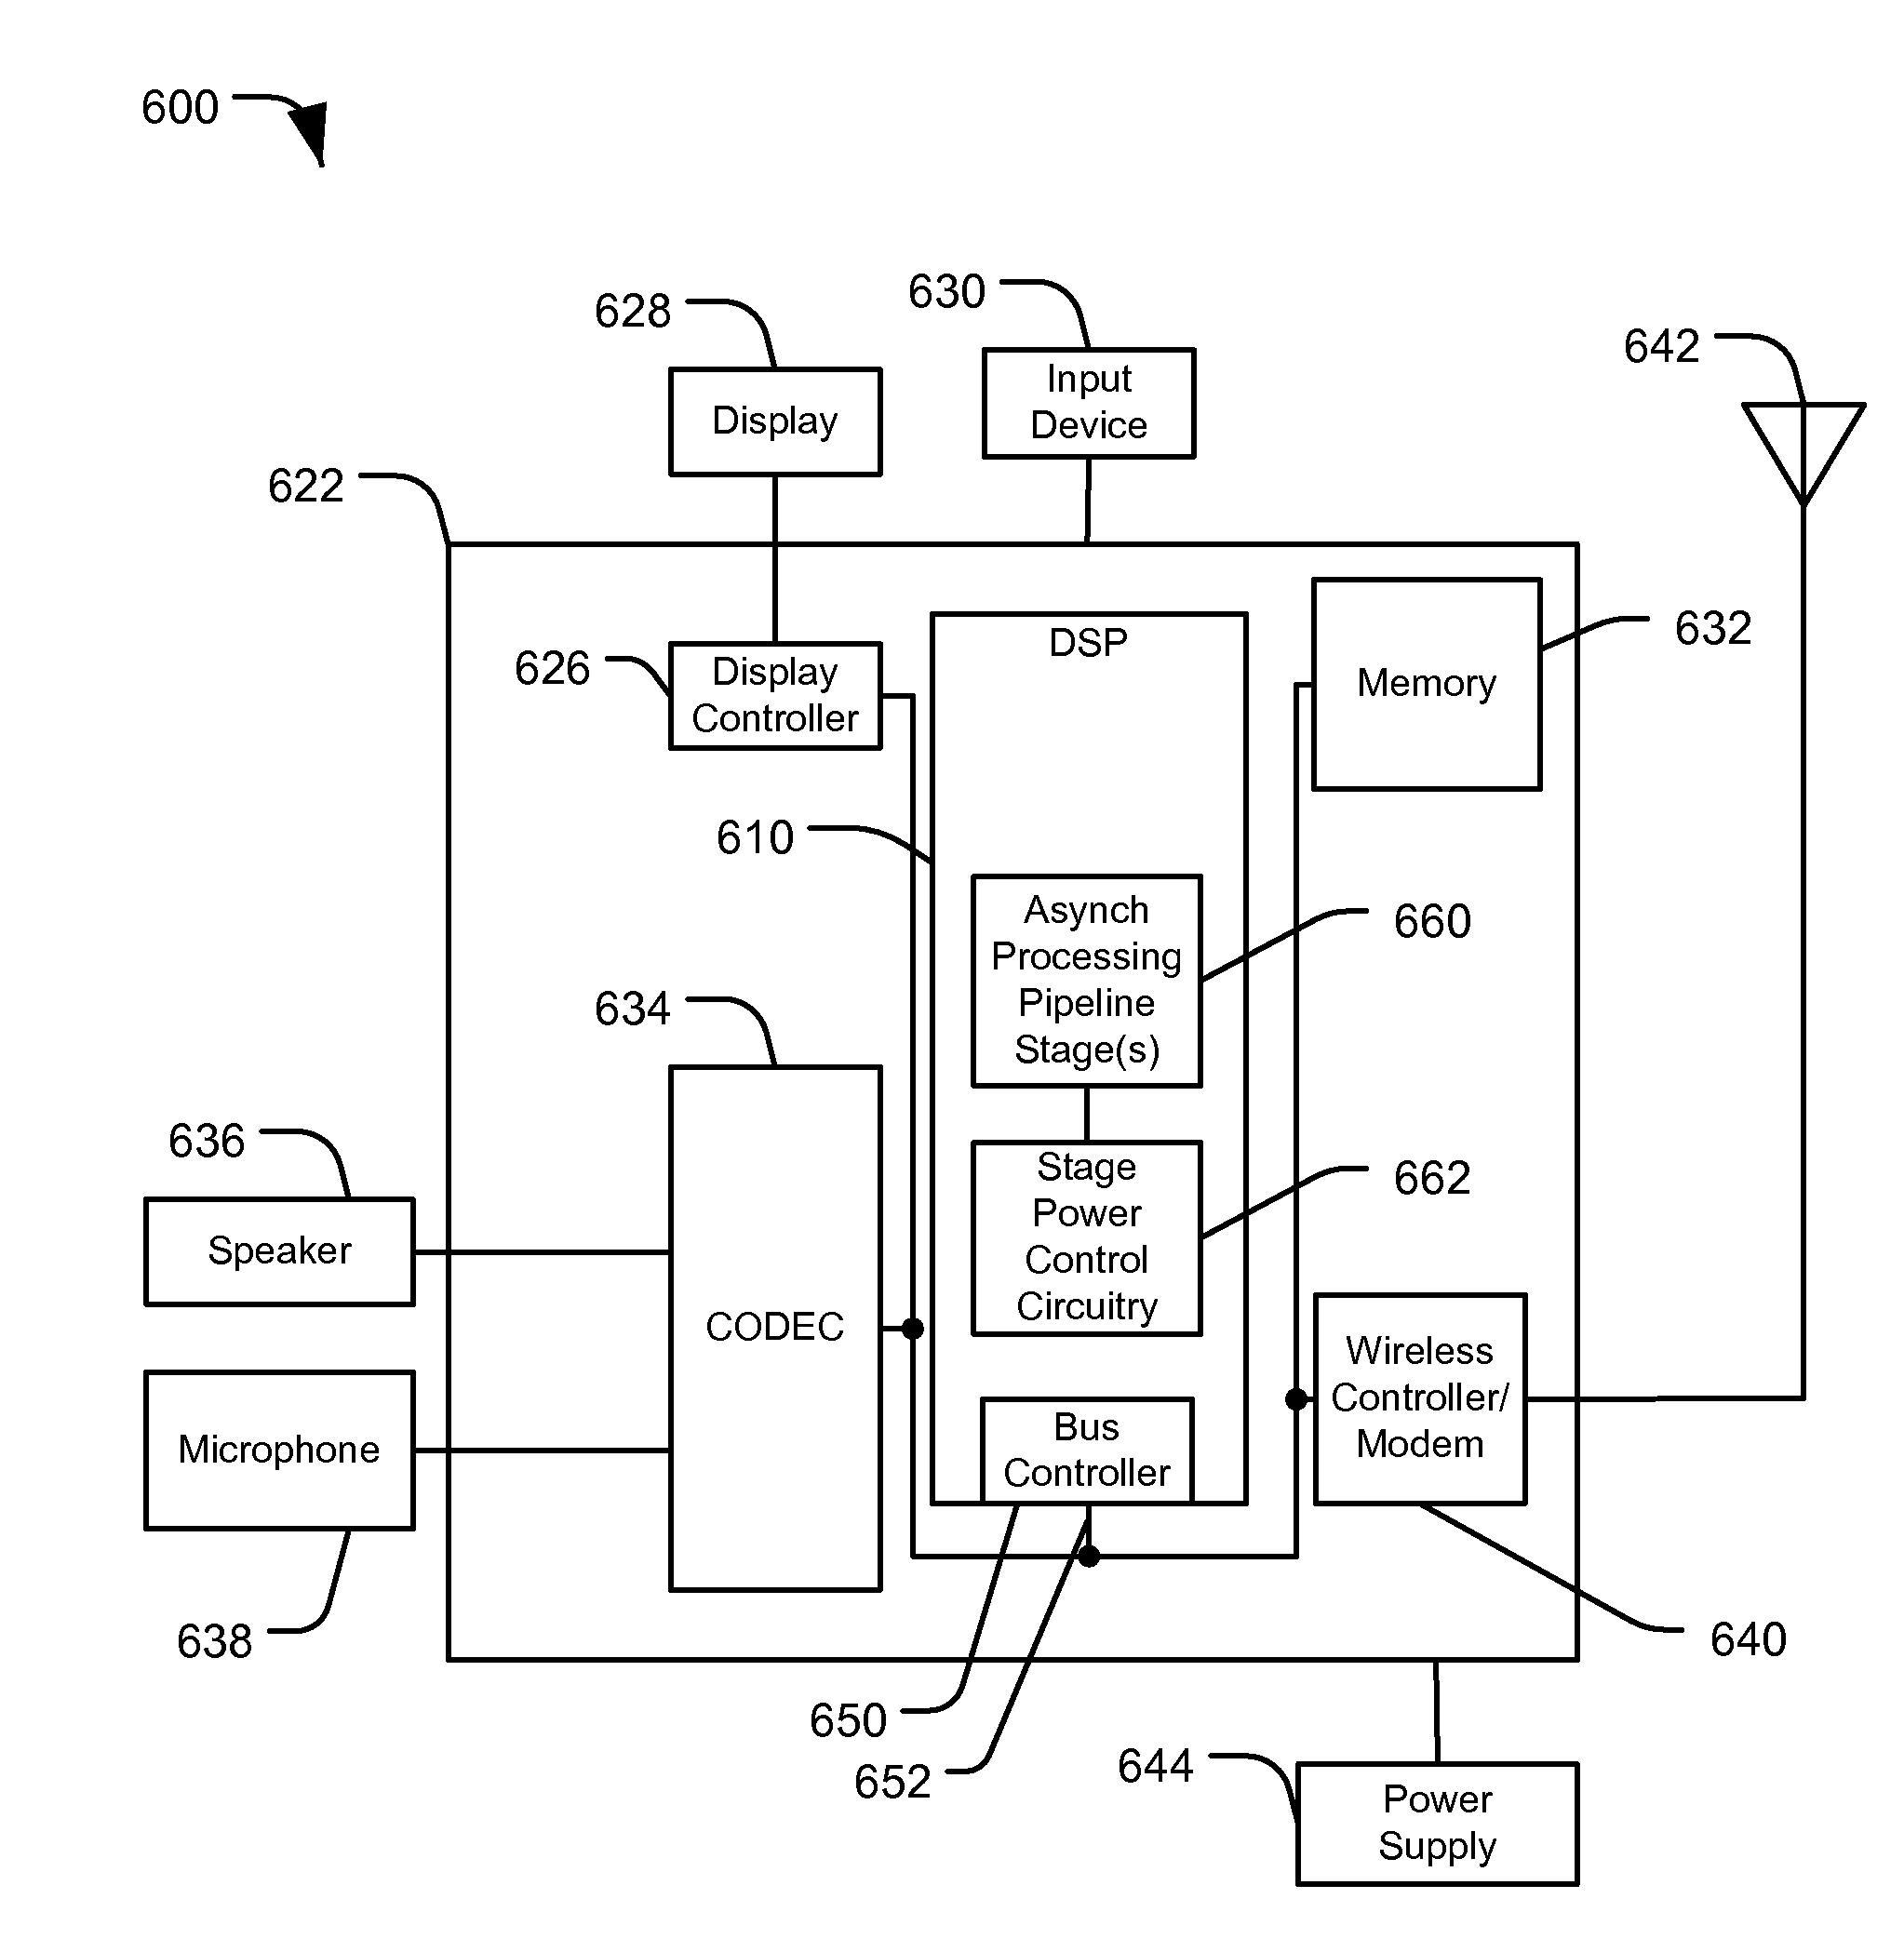 System and Method of Leakage Control in an Asynchronous System